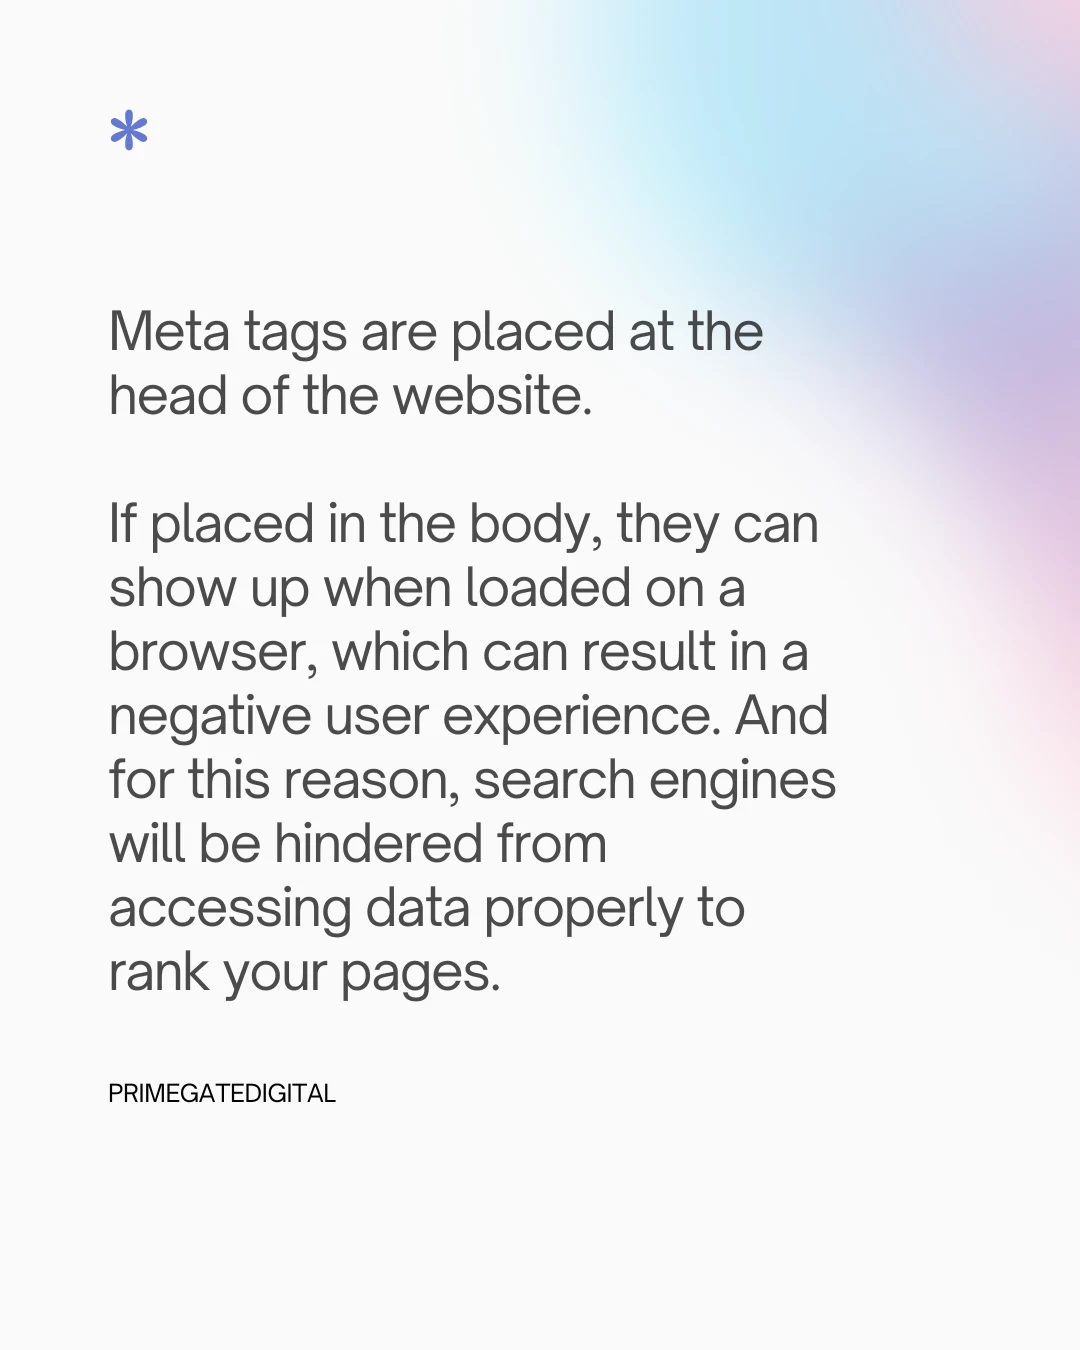 Can Meta Tags Be Placed in the Body